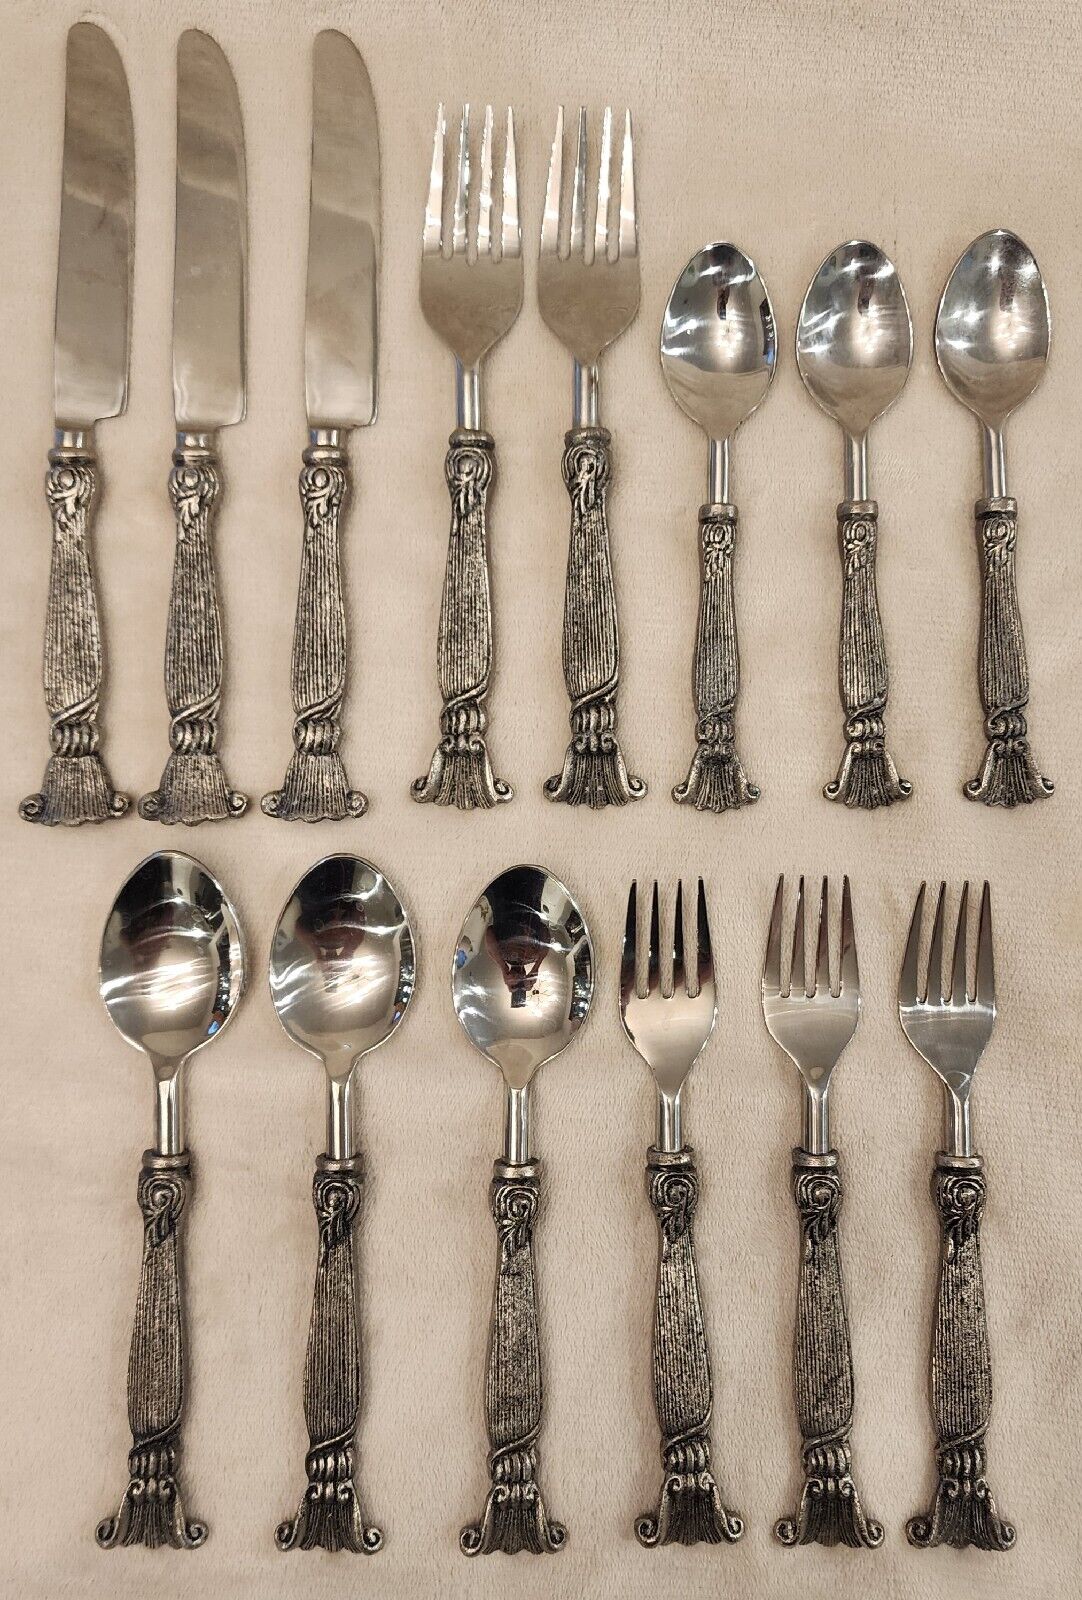 Victorian Brutalist Sandcast Unmarked Stainless Flatware Set Of 14 Pieces Total